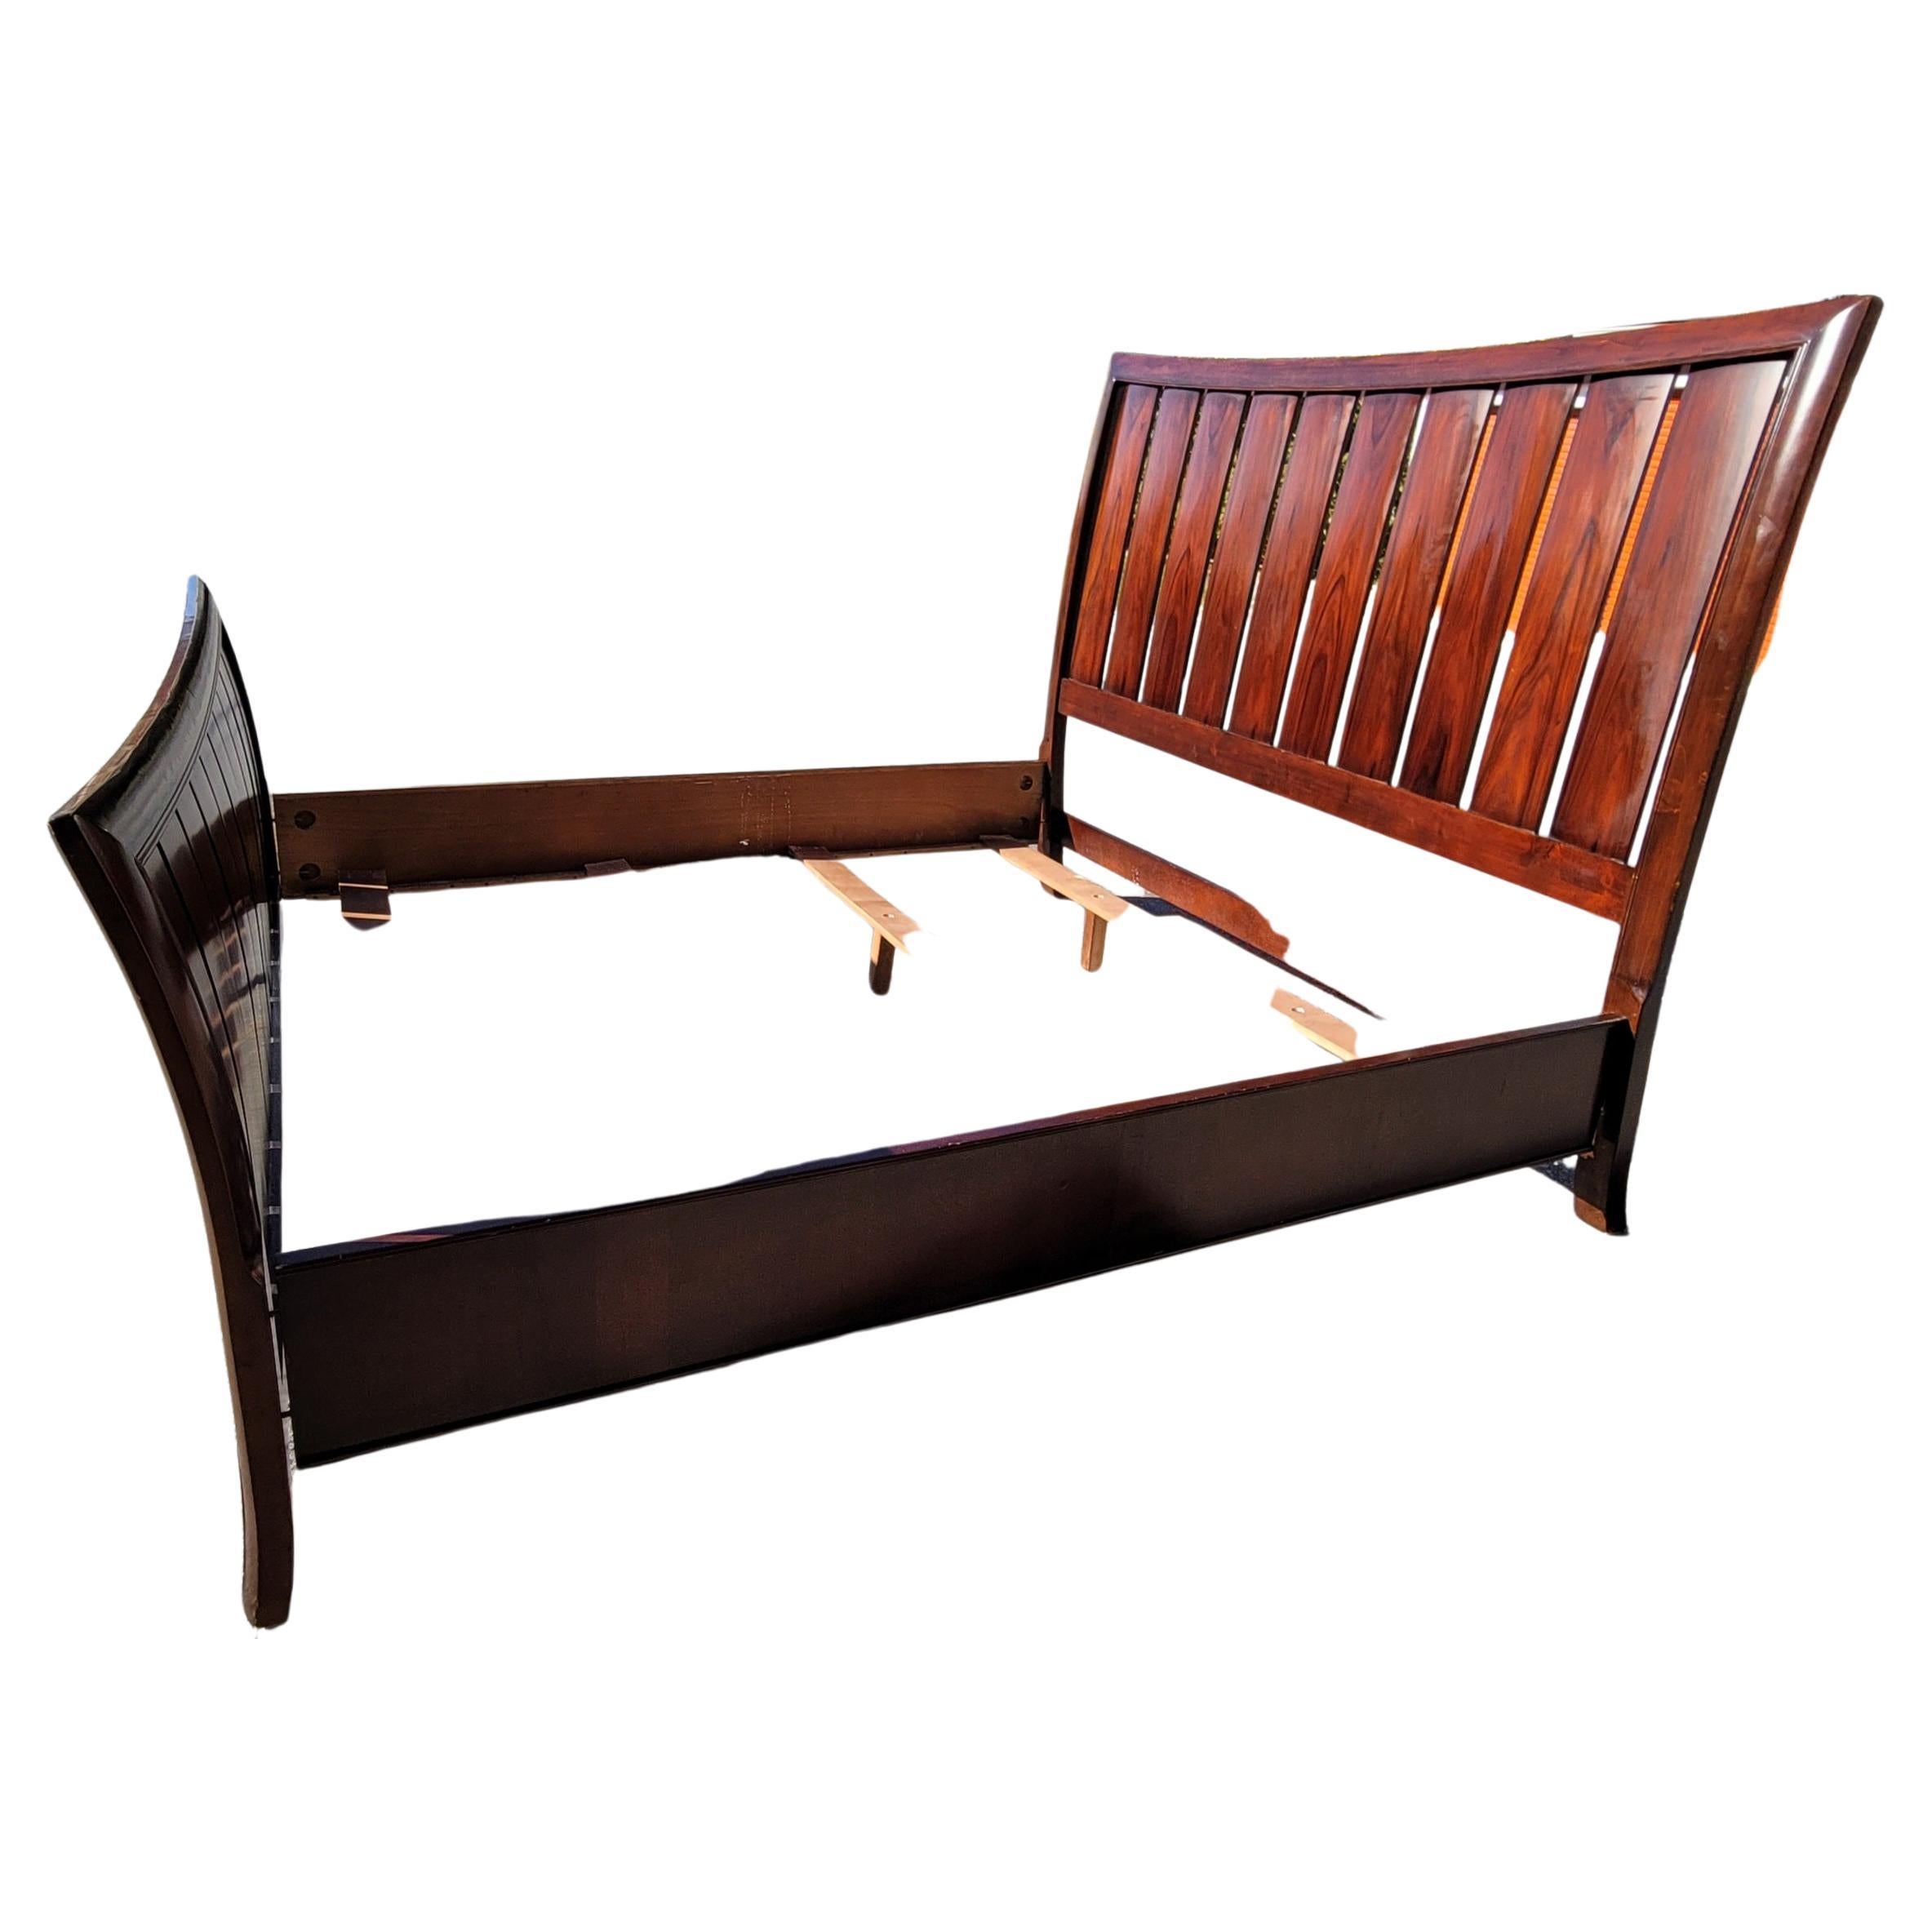 Hardwood Rosewood King Size Slatted Sleigh Bed For Sale